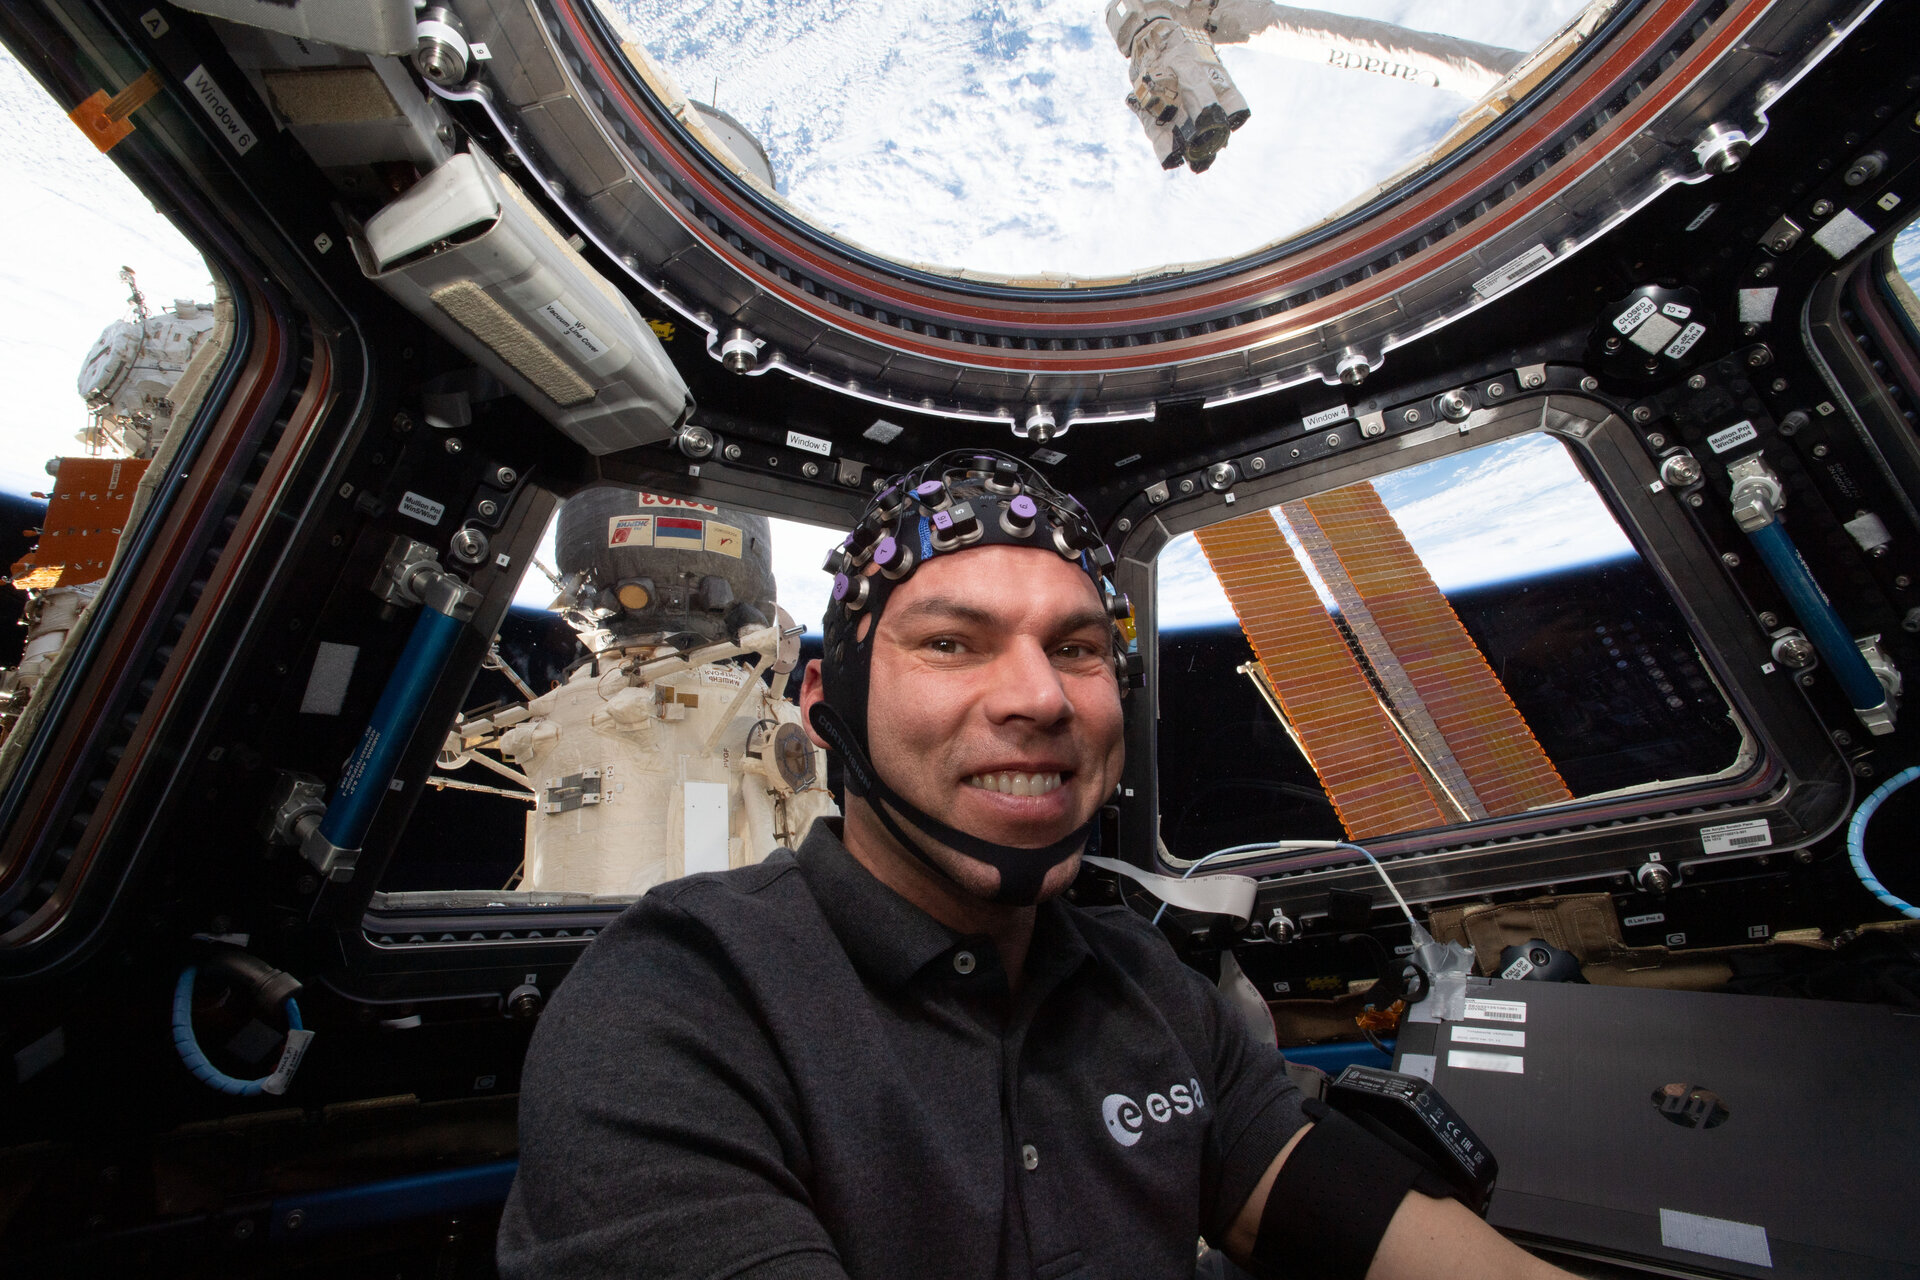 ESA project astronaut Marcus Wandt wears a cap with sensors to record his brain activity